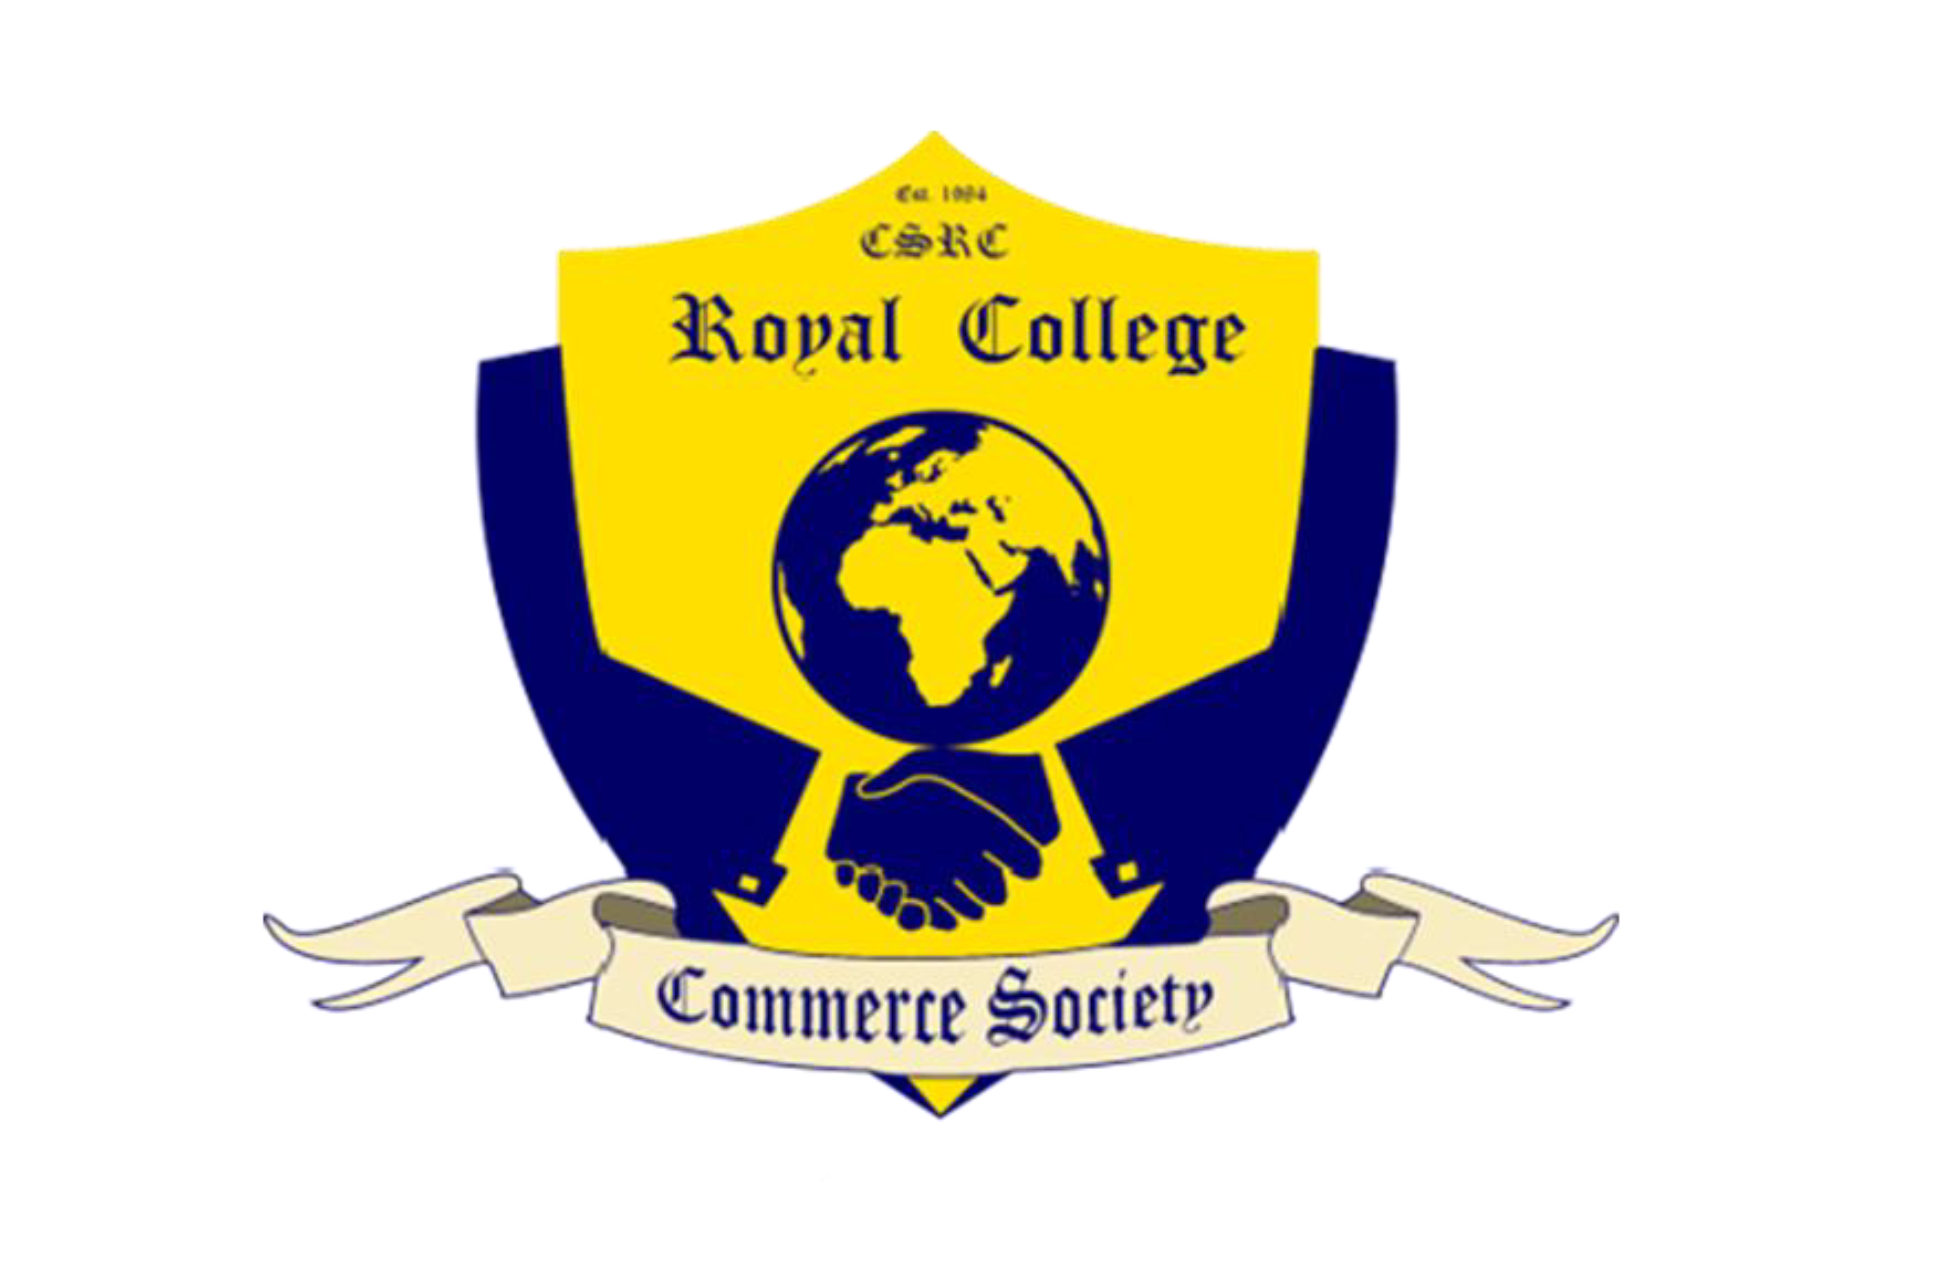 Commerce - The Royal College